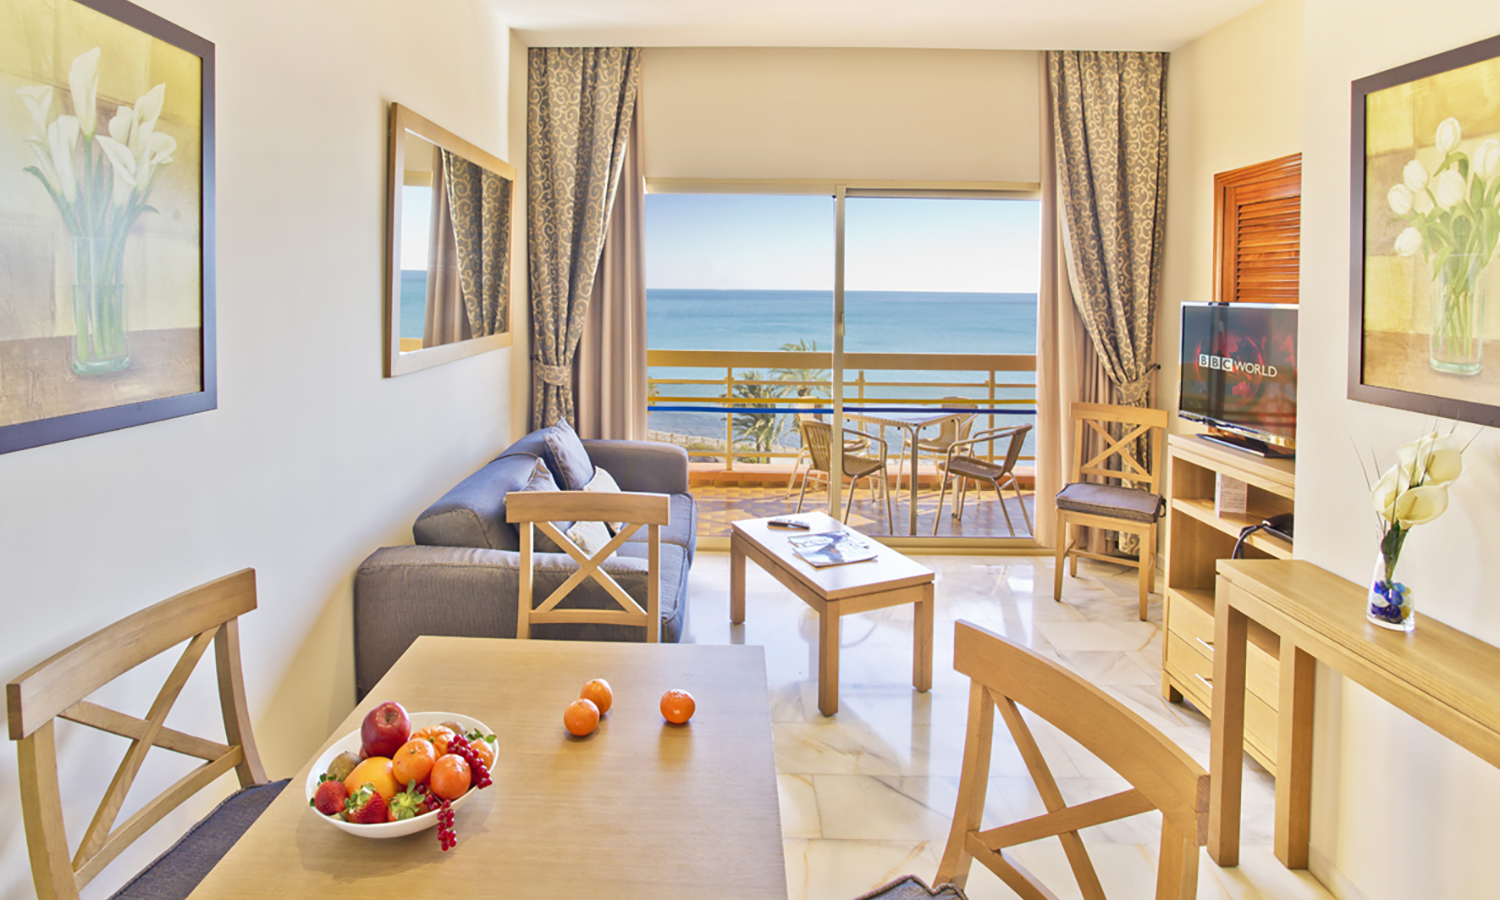 1 Bedroom Family Apartment (sea views) - Lounge